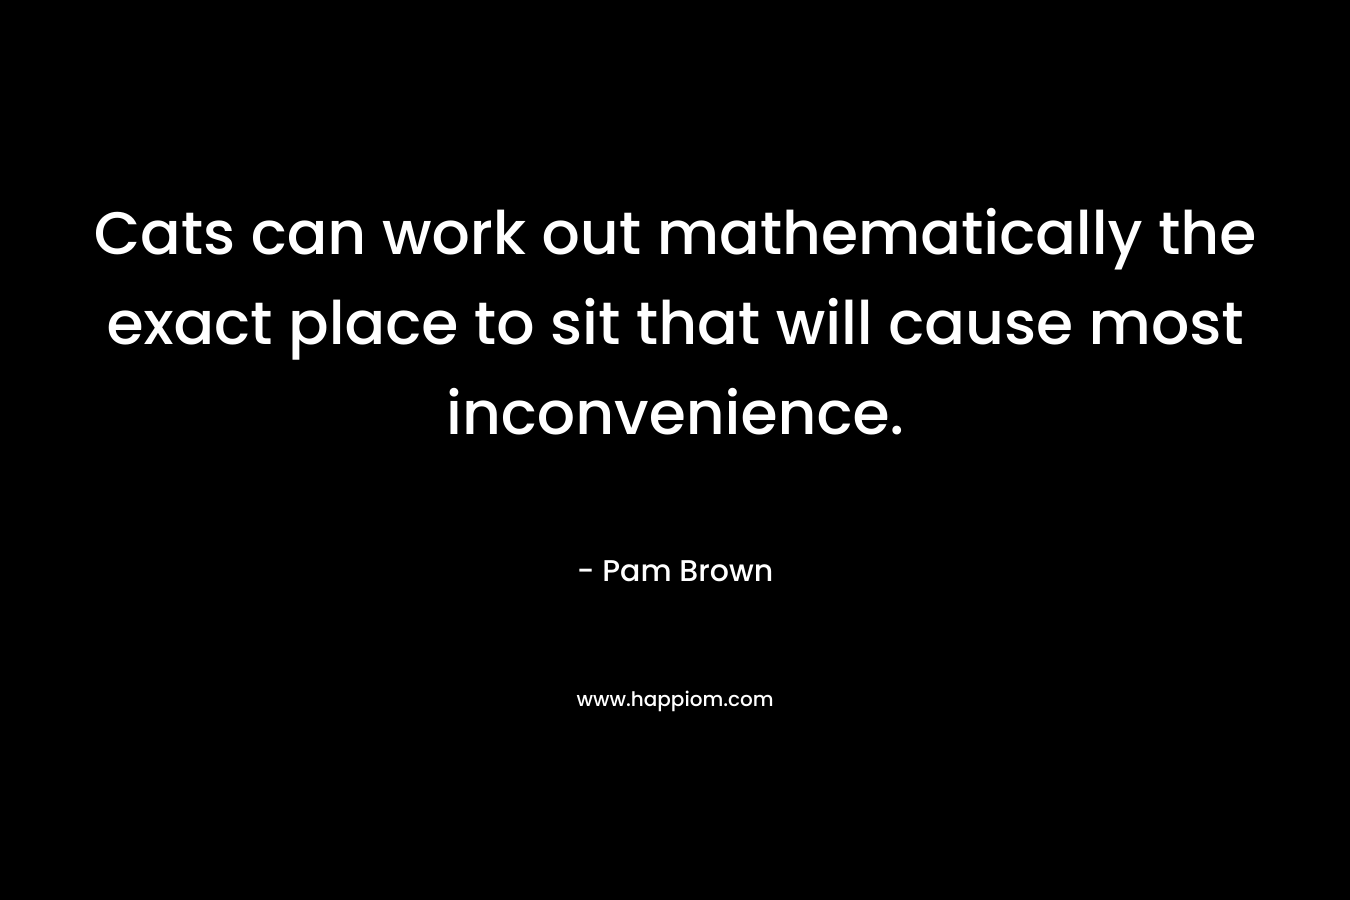 Cats can work out mathematically the exact place to sit that will cause most inconvenience. – Pam Brown